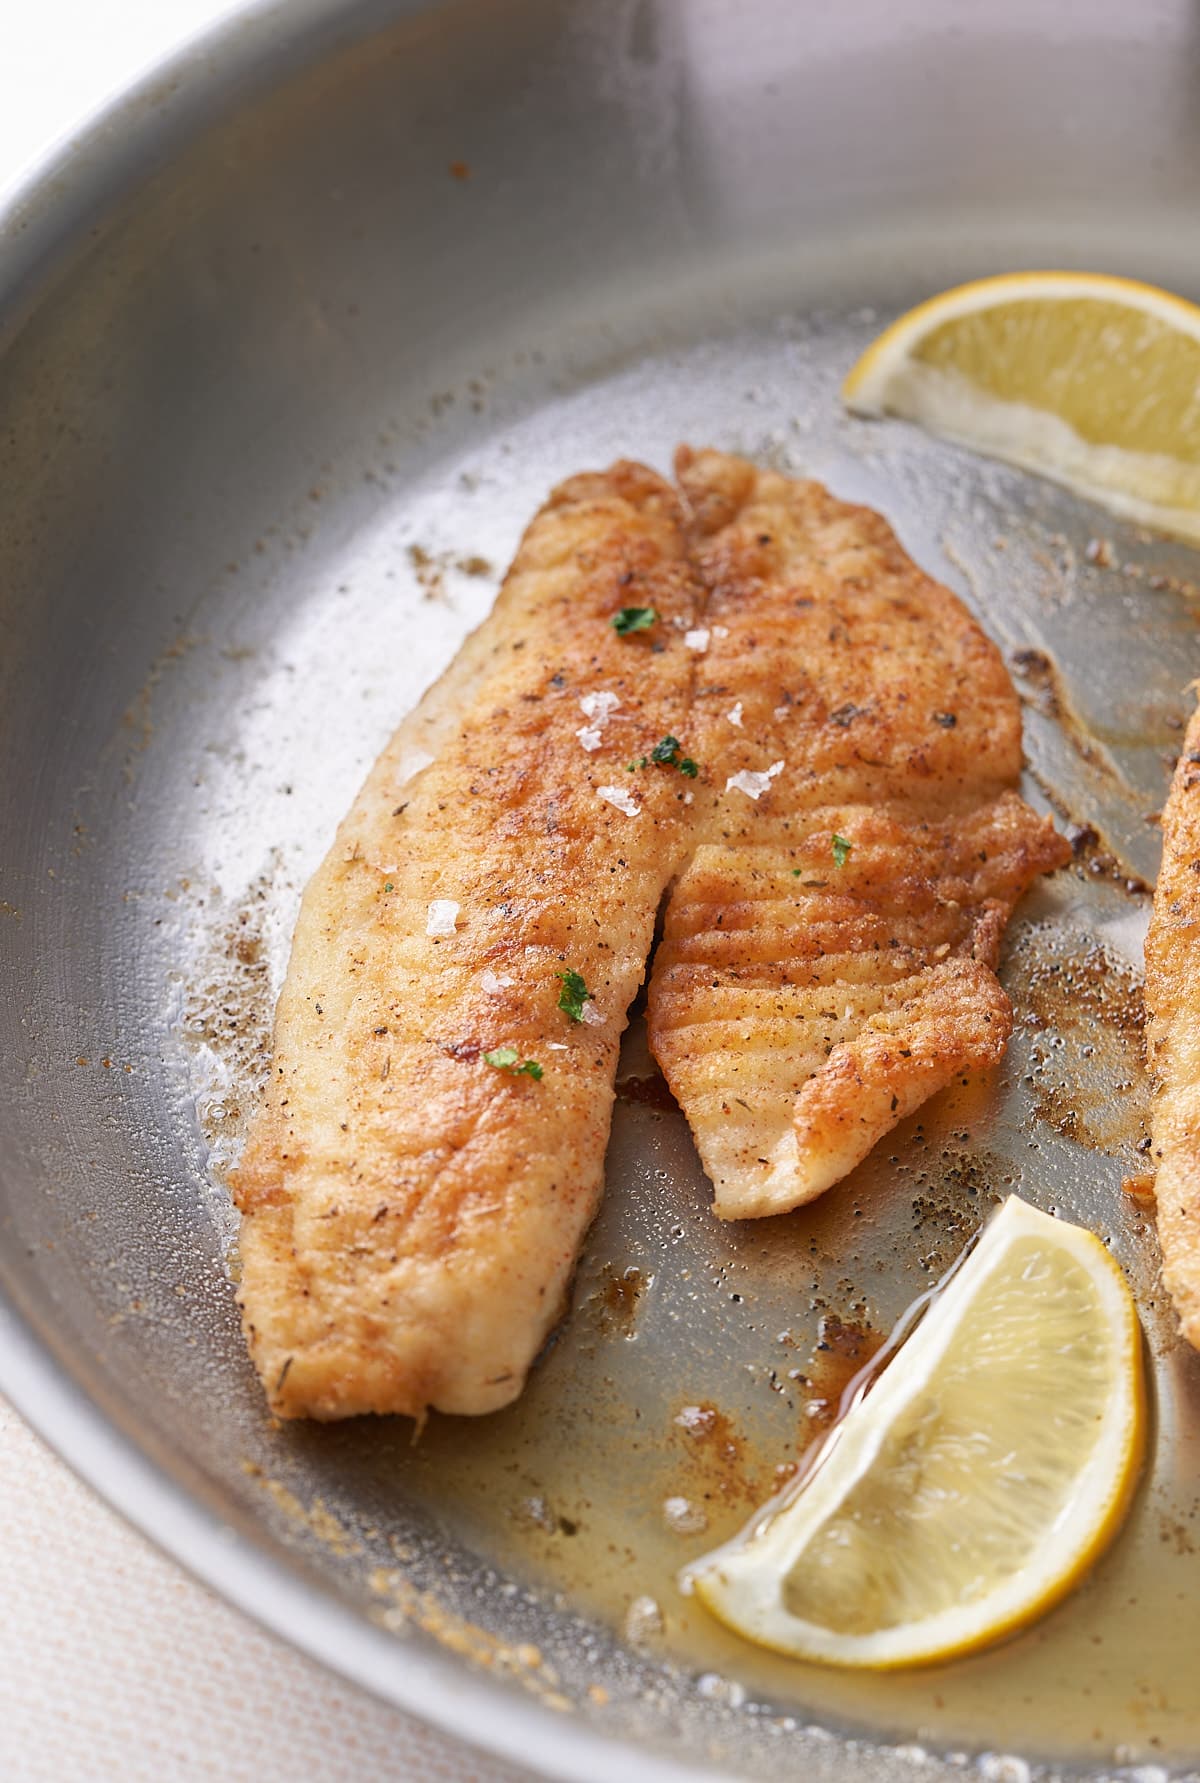 Pan fried fish in a large skillet with added slices of fresh lemon.